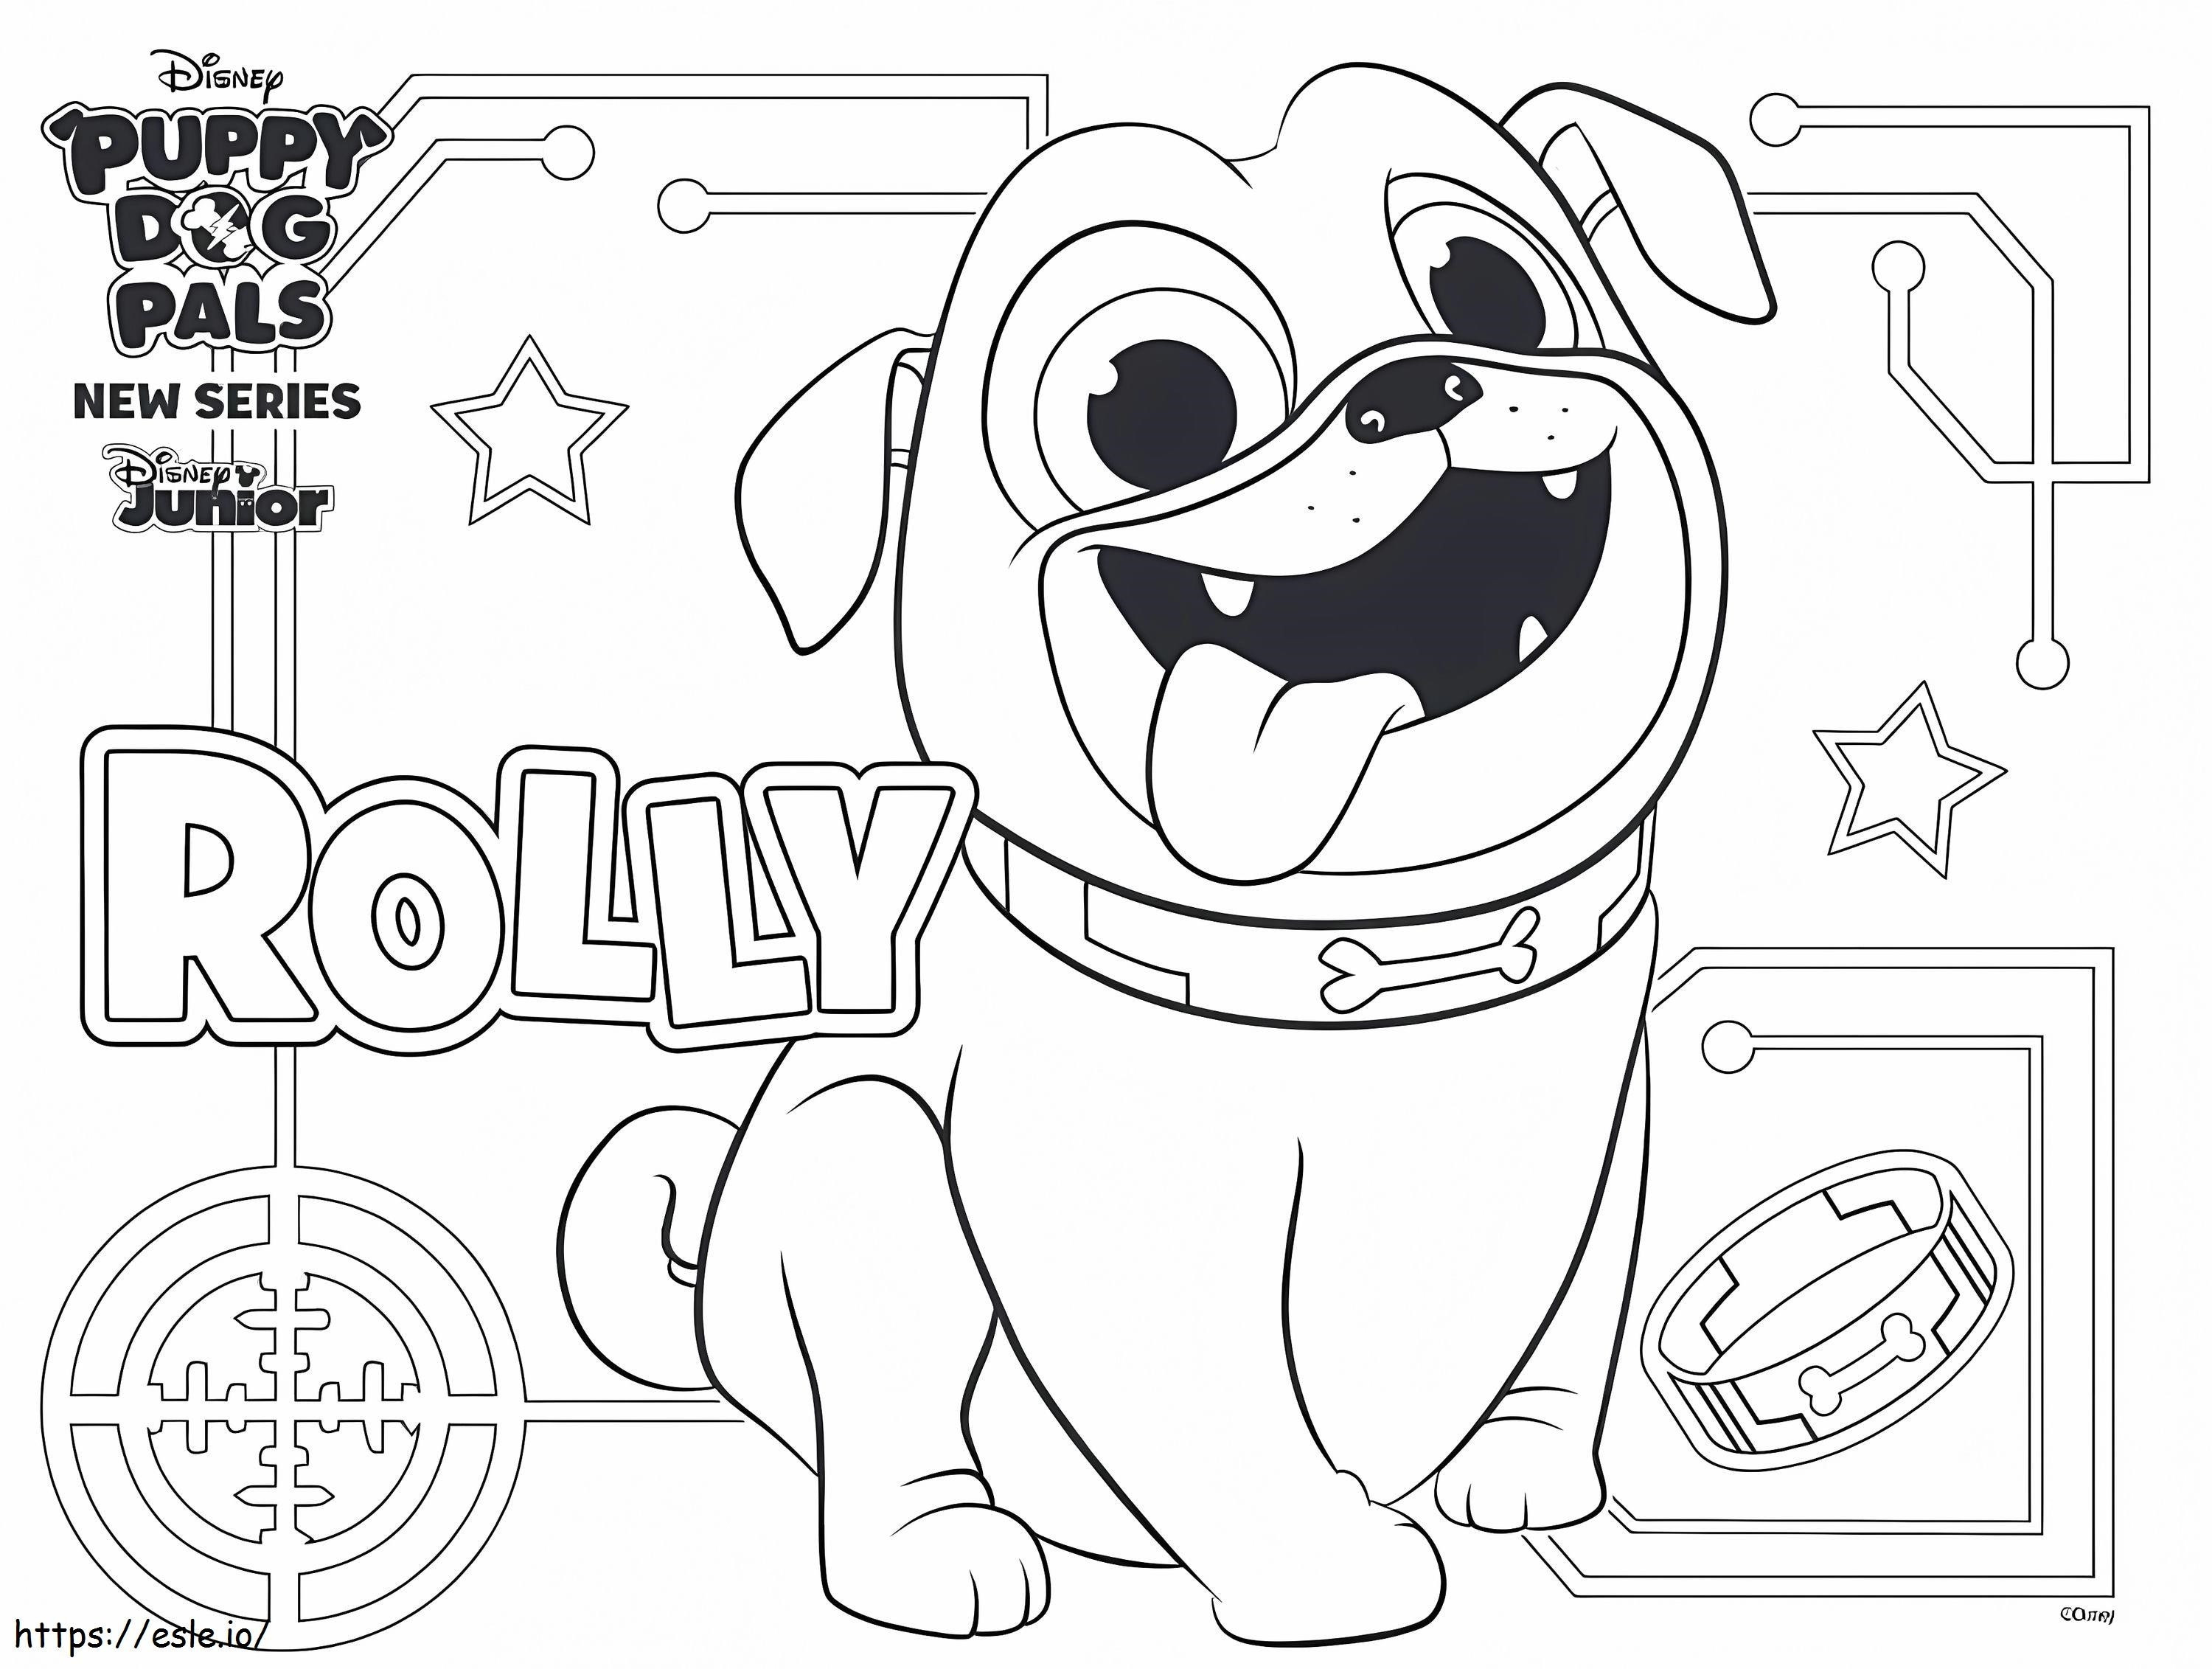 Fun Rolly coloring page